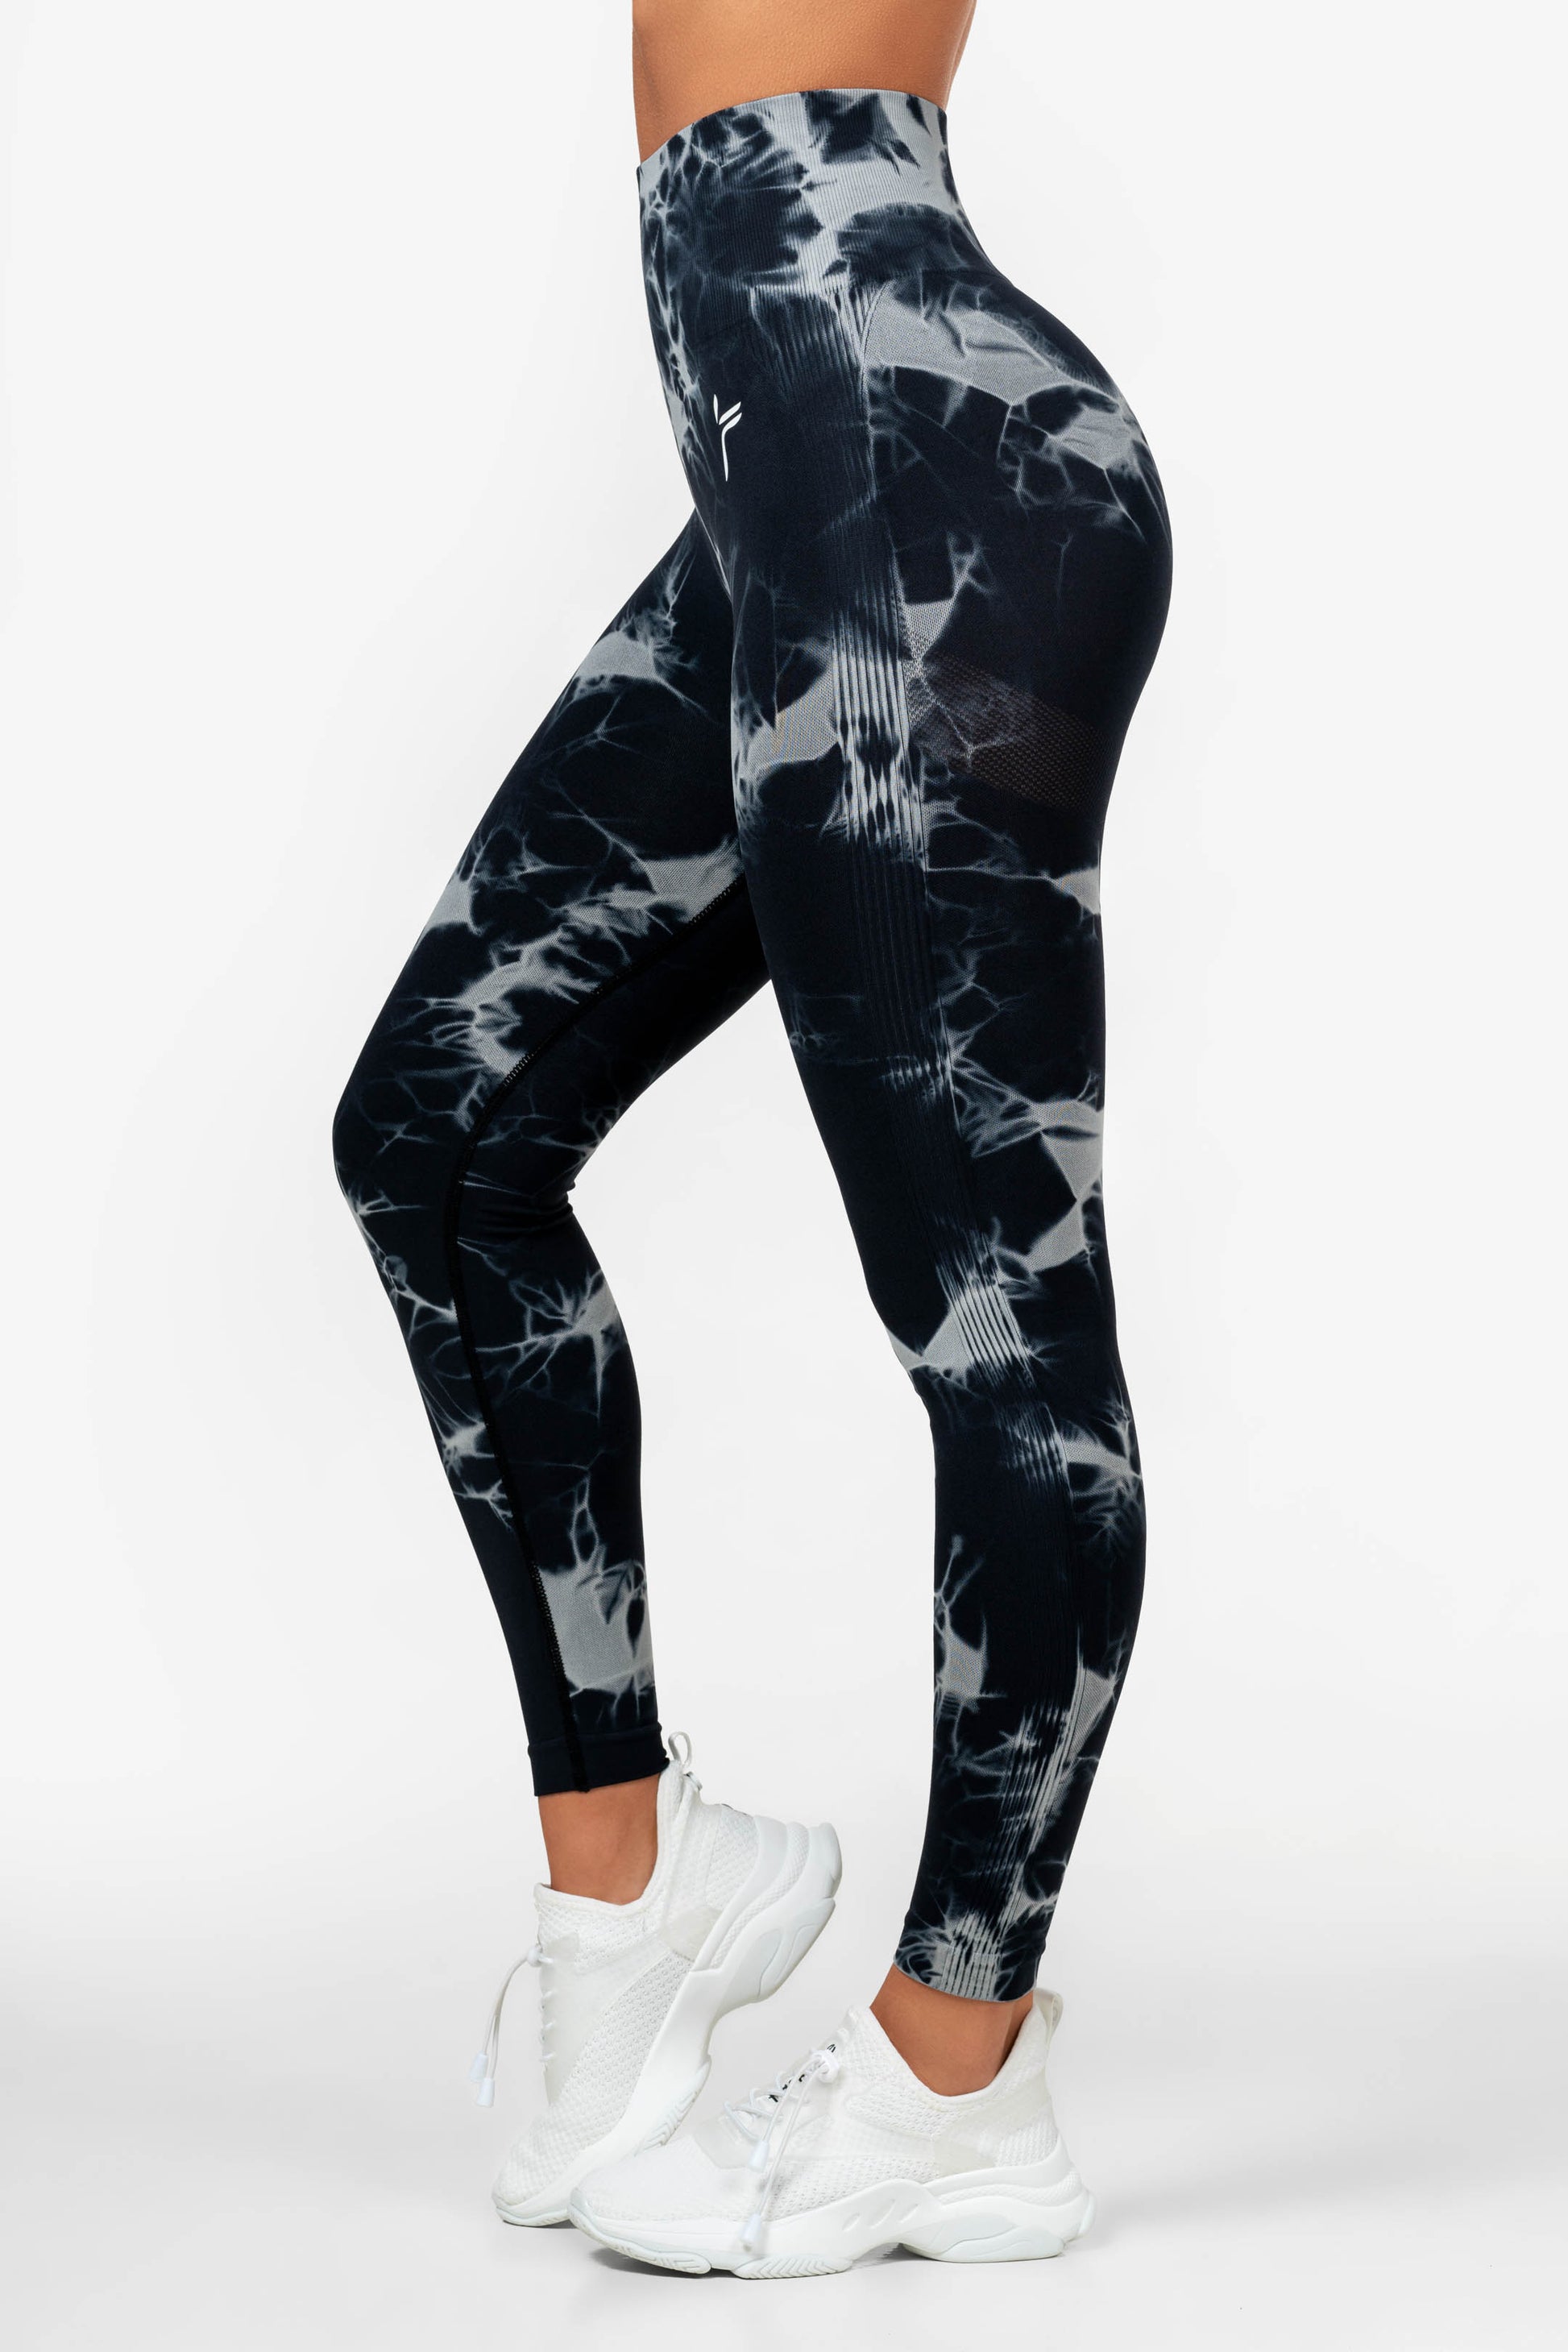 plus Size Tall Yoga Pants for Women Women Seamless Tie Dye And Tie